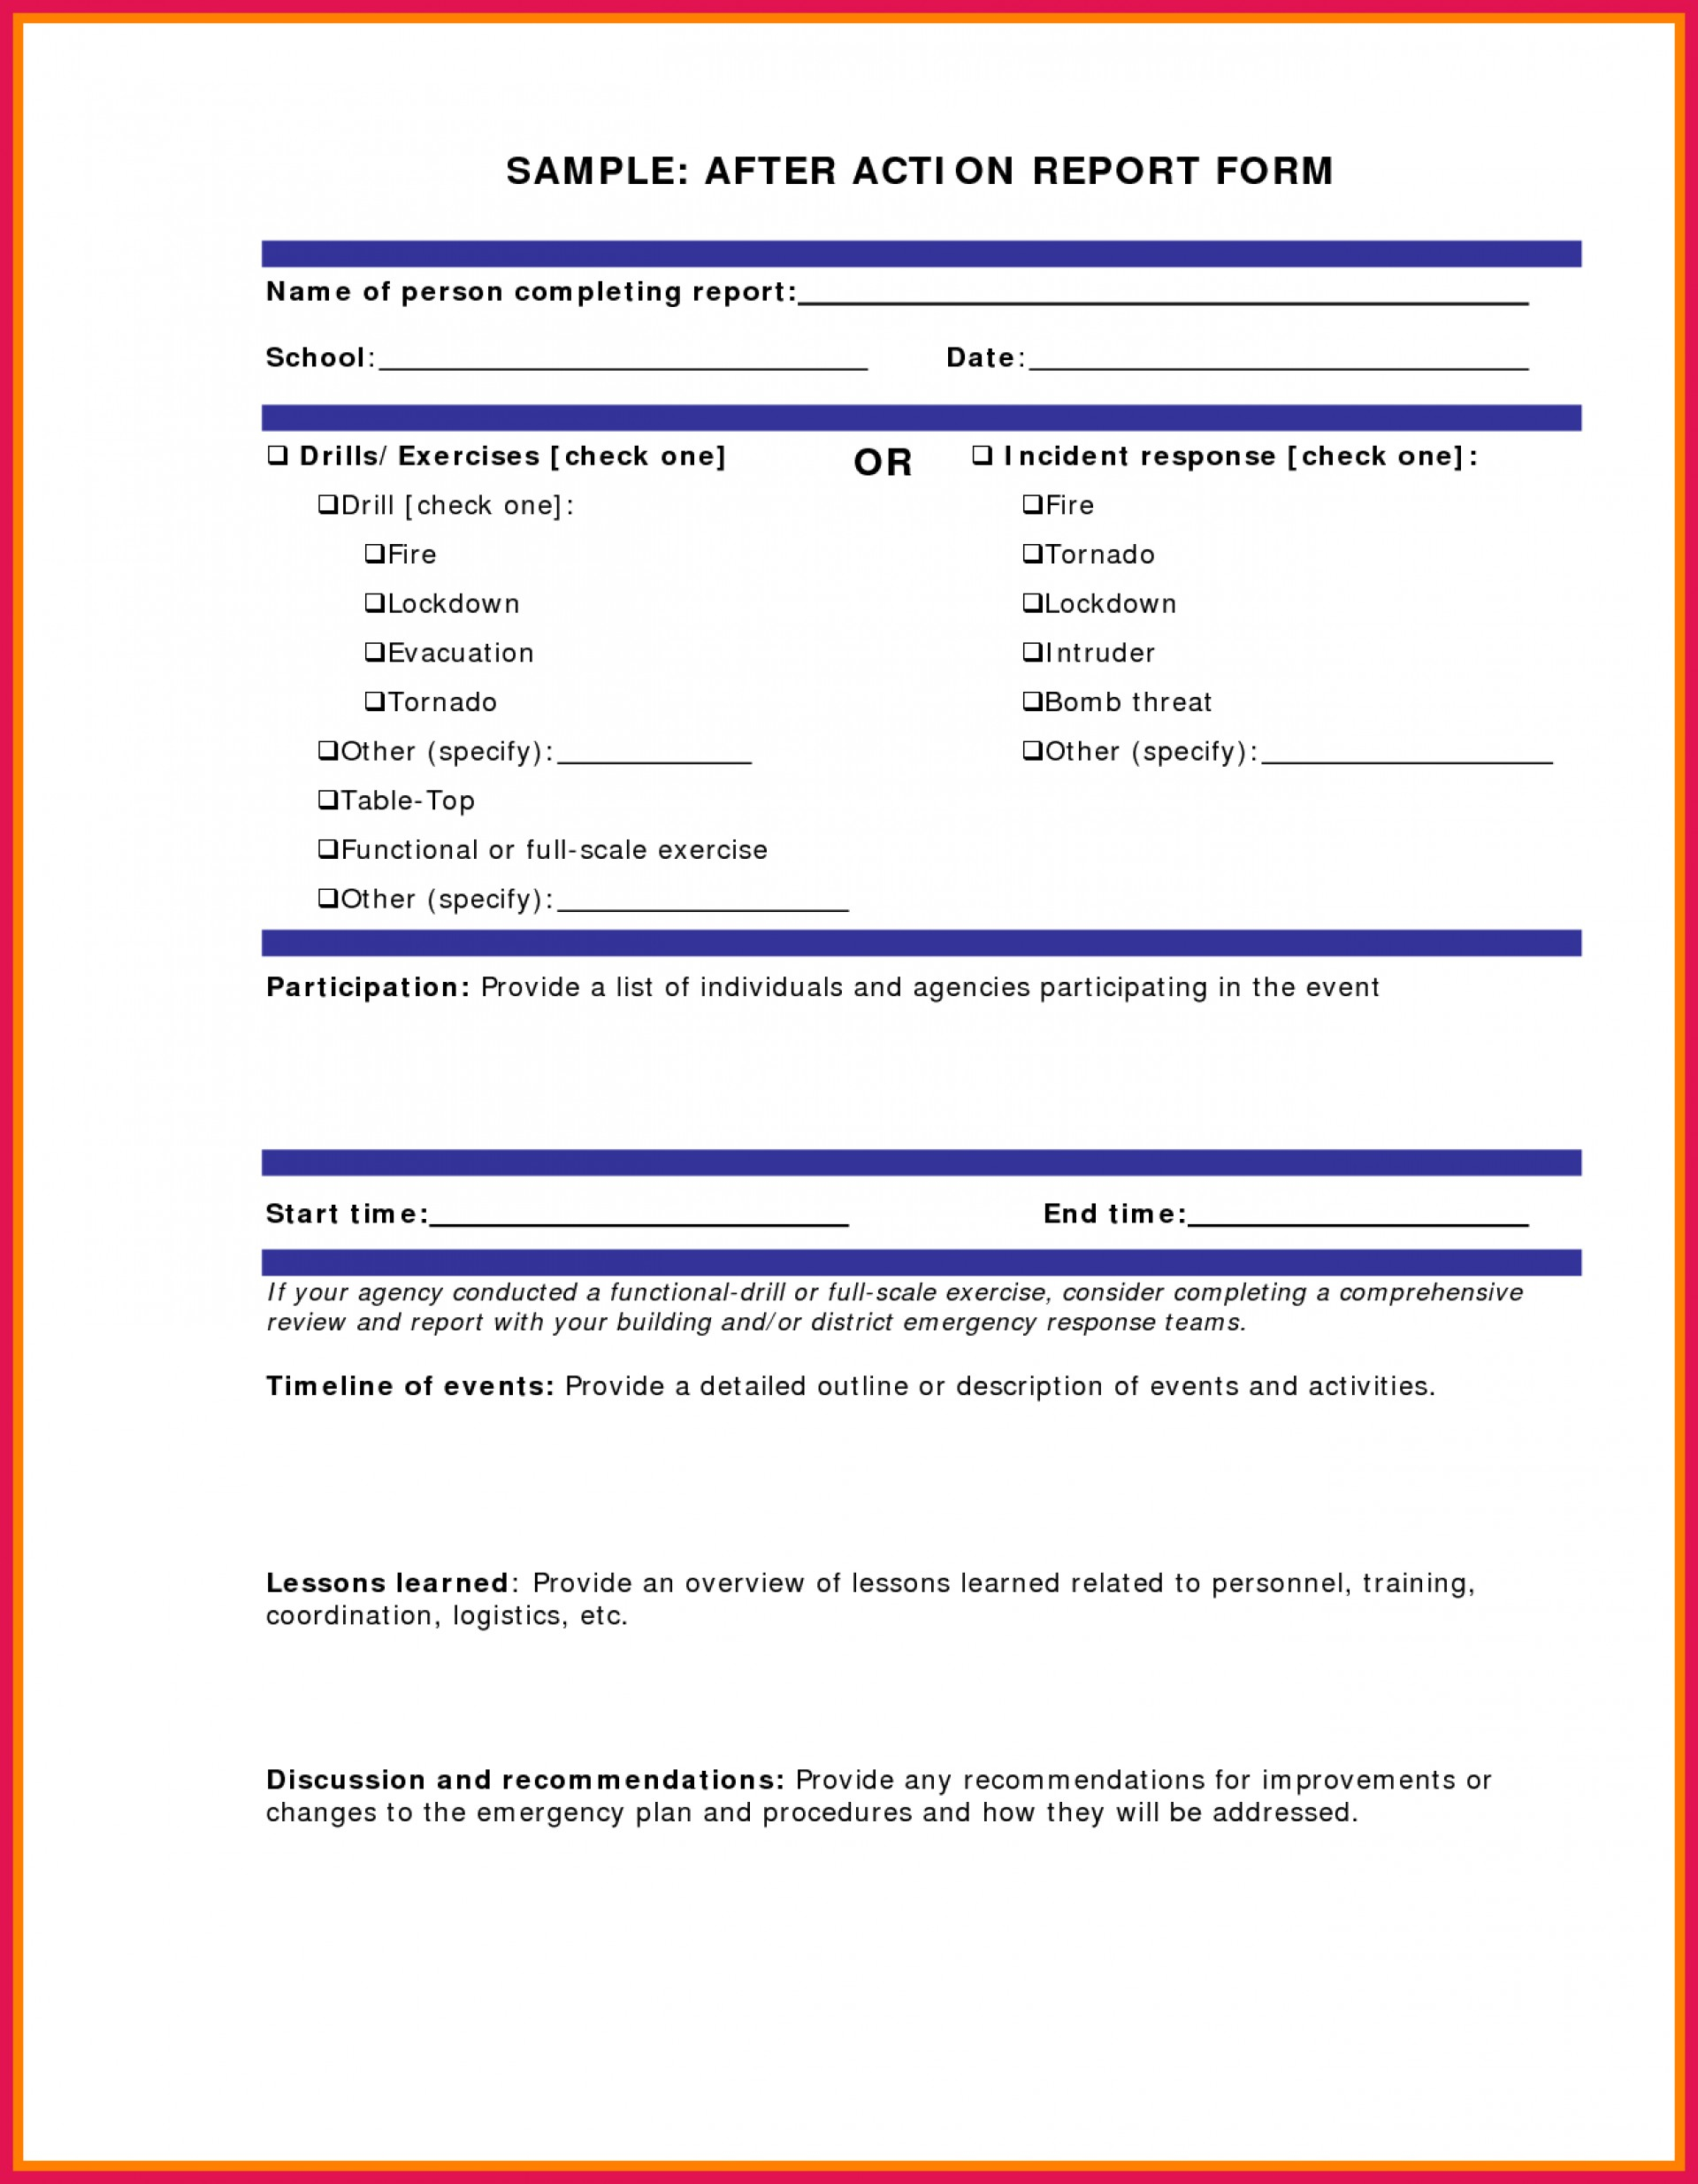 013 After Action Report Template Fascinating Ideas Word Army For After Training Report Template